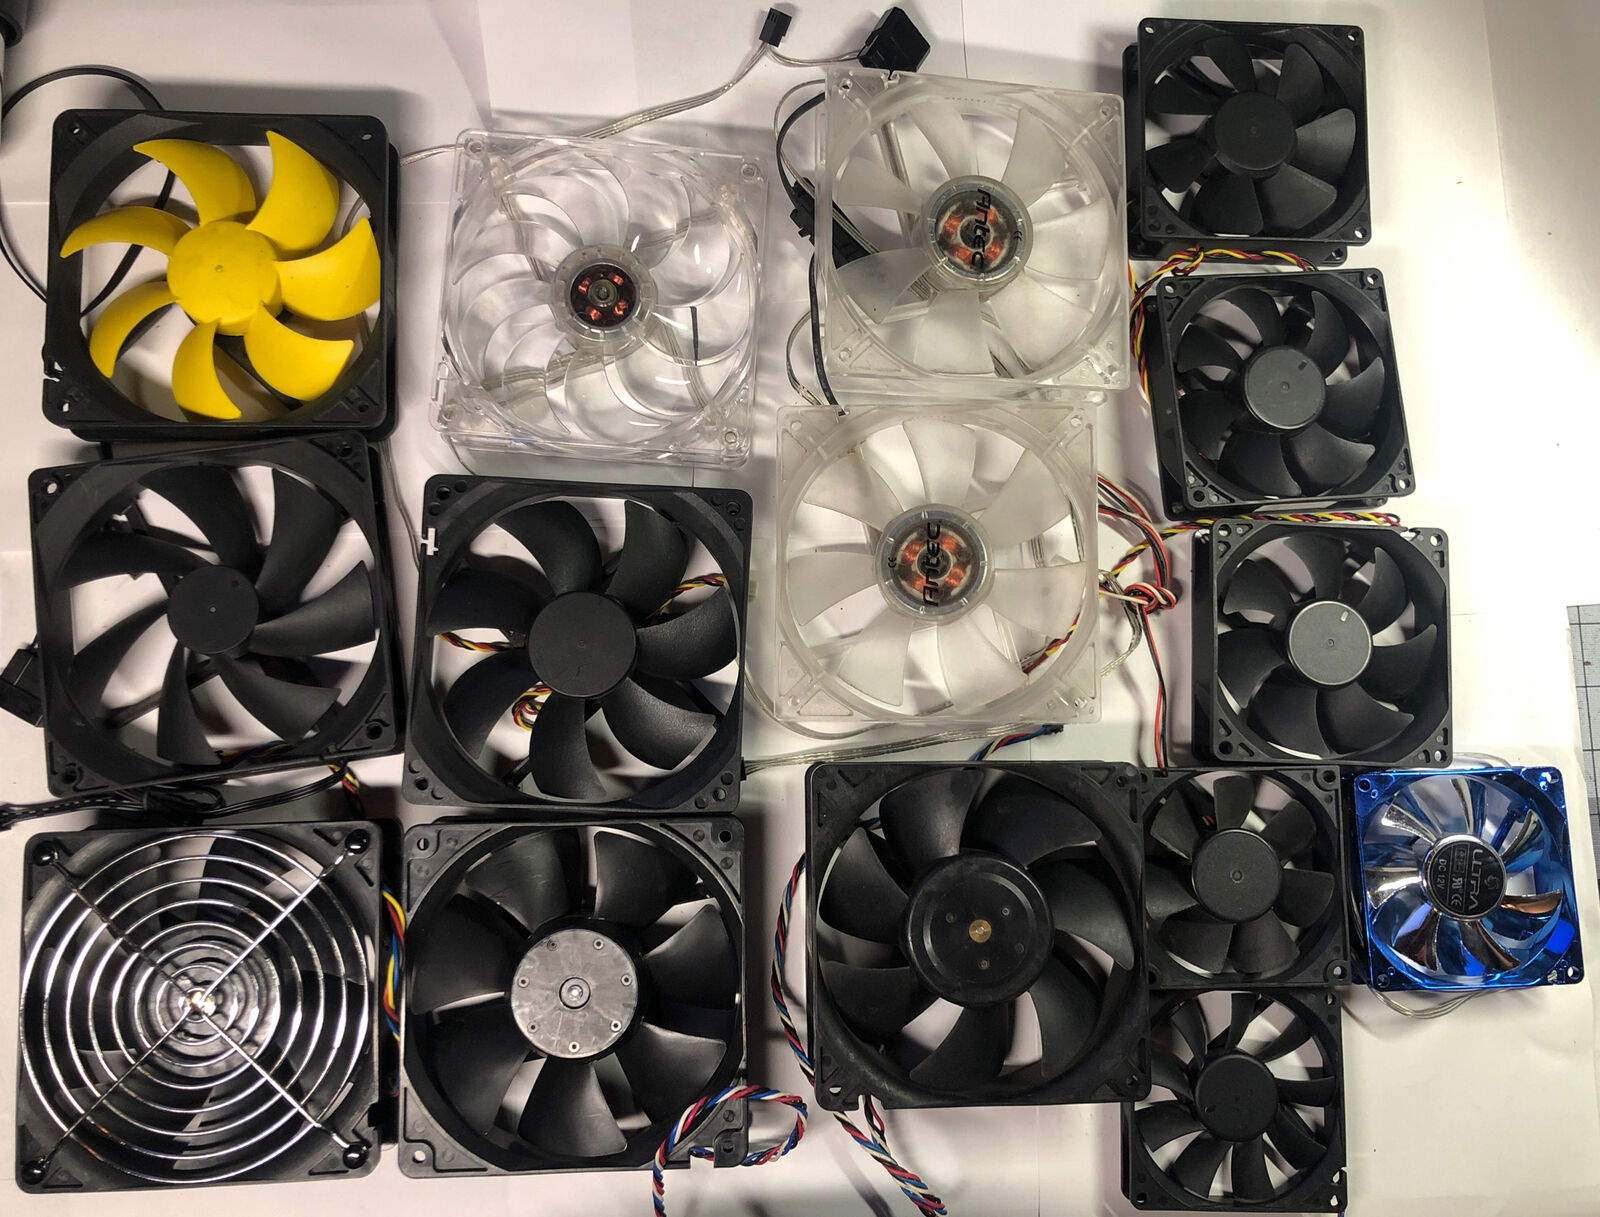 Lot of 15 case fans of various size and brands|Check photos for specific details